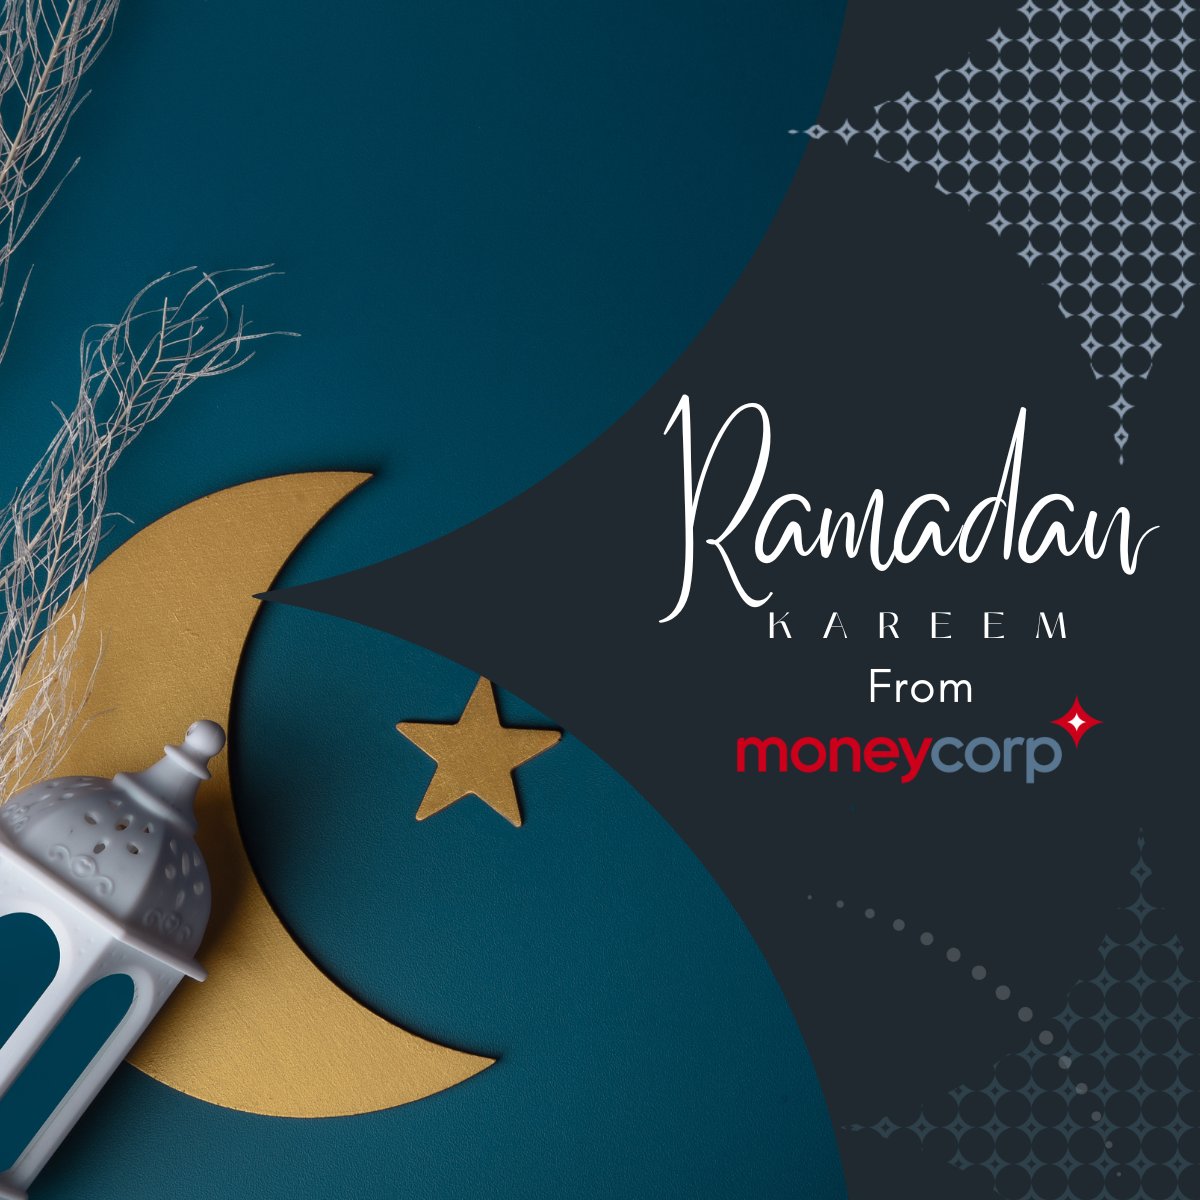 As the holy month of Ramadan begins, we extend our best wishes to our colleagues, clients and partners who are observing this sacred time. May this Ramadan bring hope, health, and happiness to you and your families.